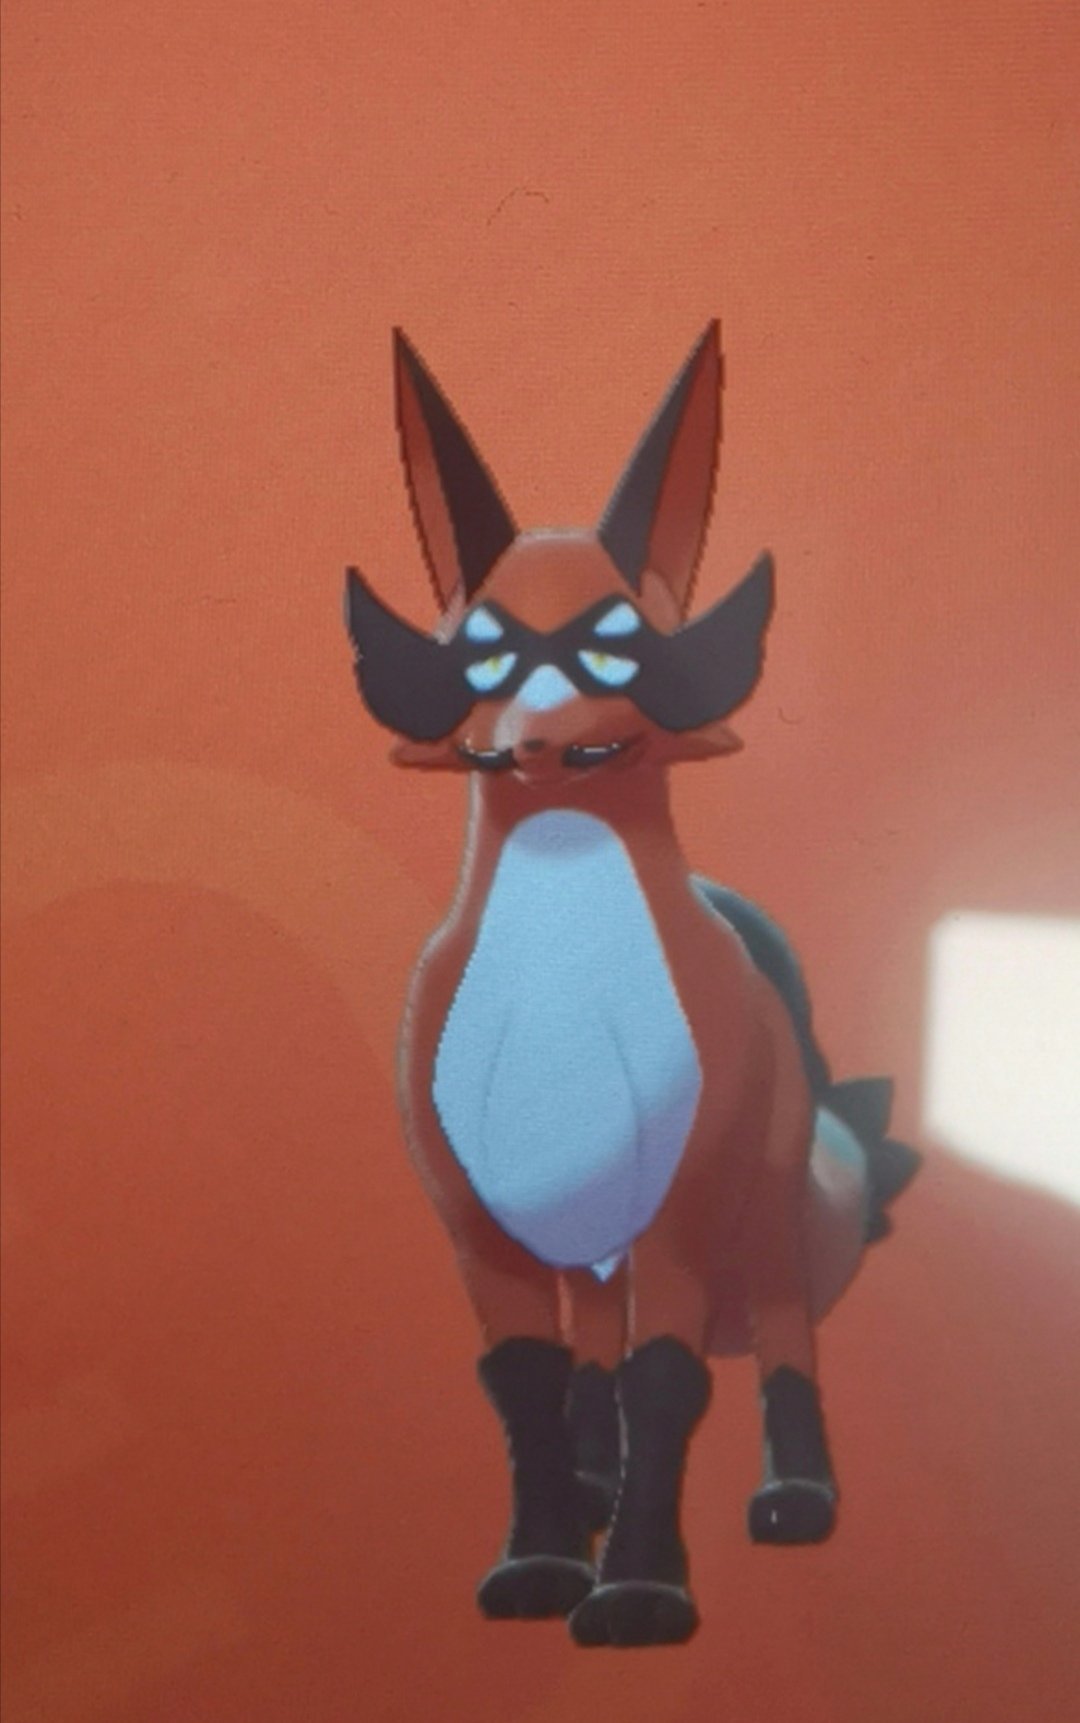 Rumour: The Starter Evolutions For Pokémon Sword And Shield Might Have